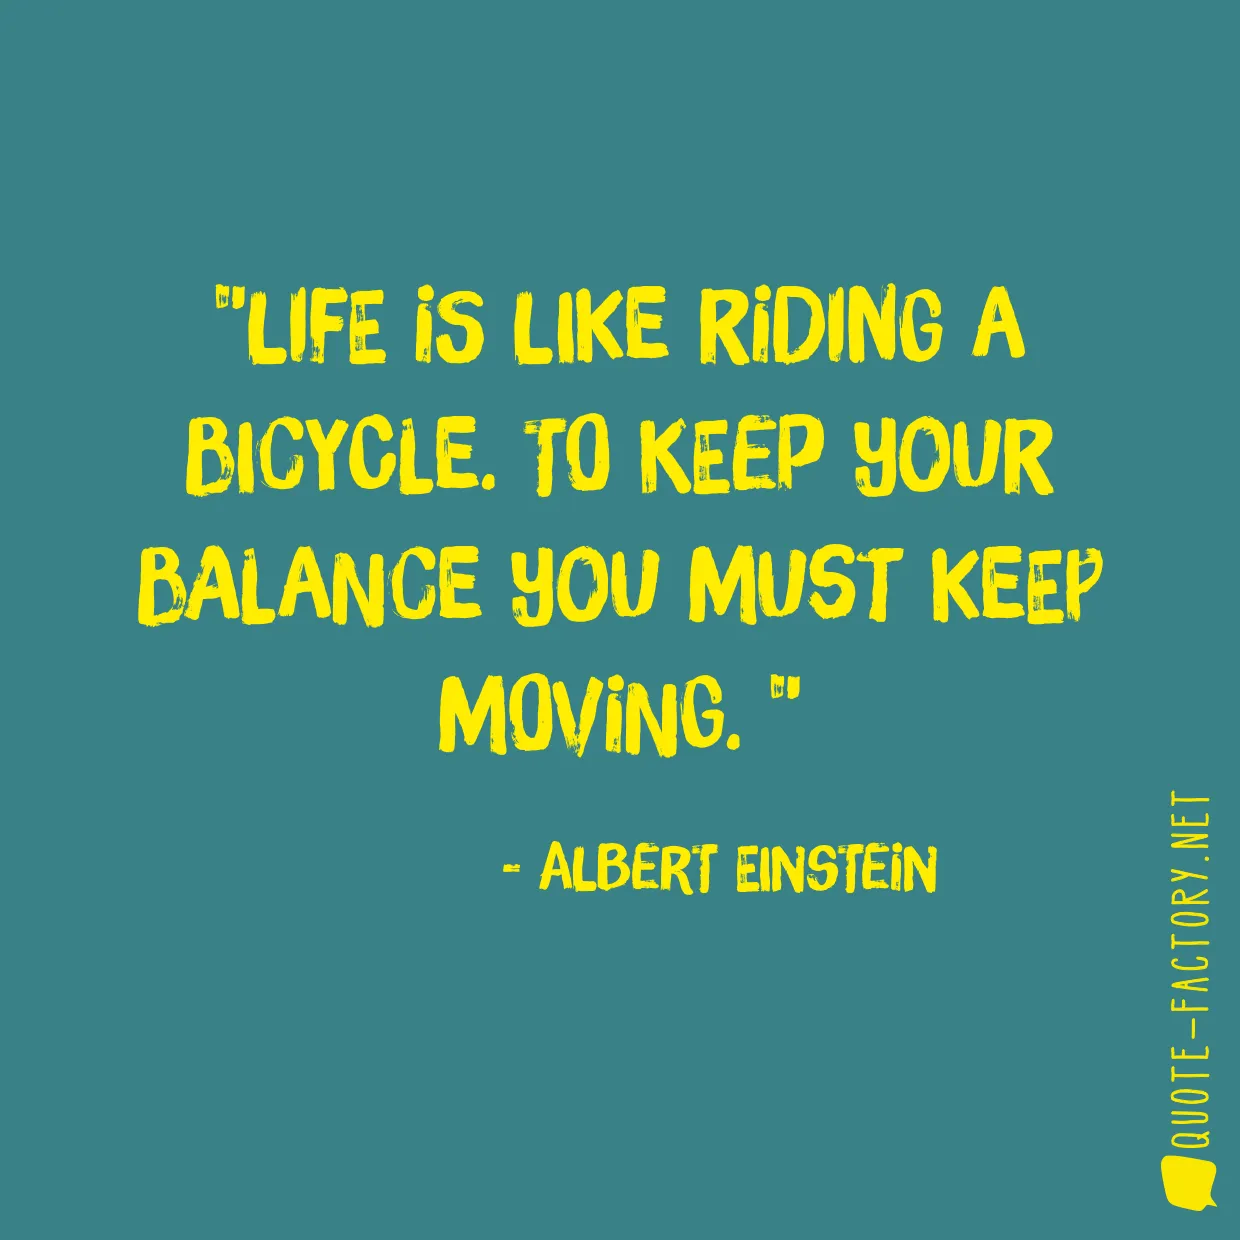 Life is like riding a bicycle. To keep your balance you must keep moving. 